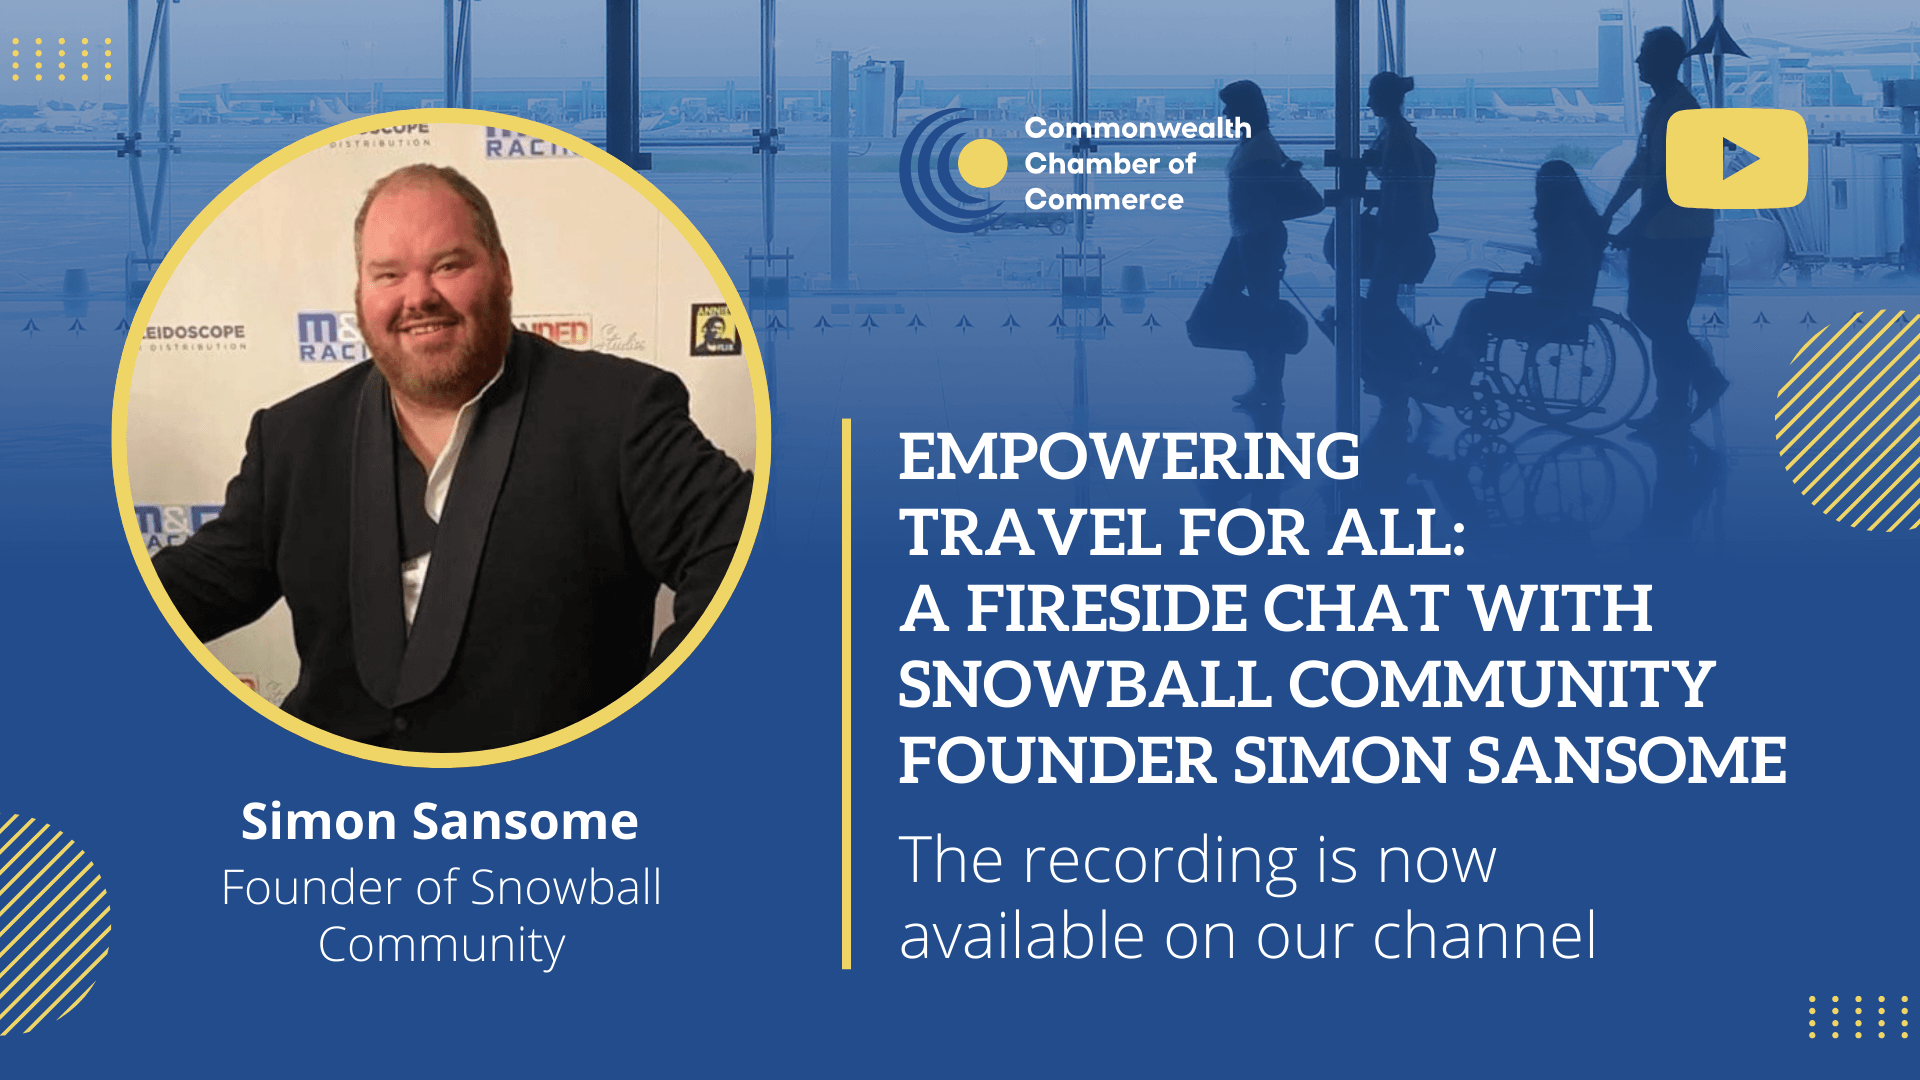 Empowering Travel for All: A Fireside Chat with Snowball Community Founder Simon Sansome | Webinar Recording